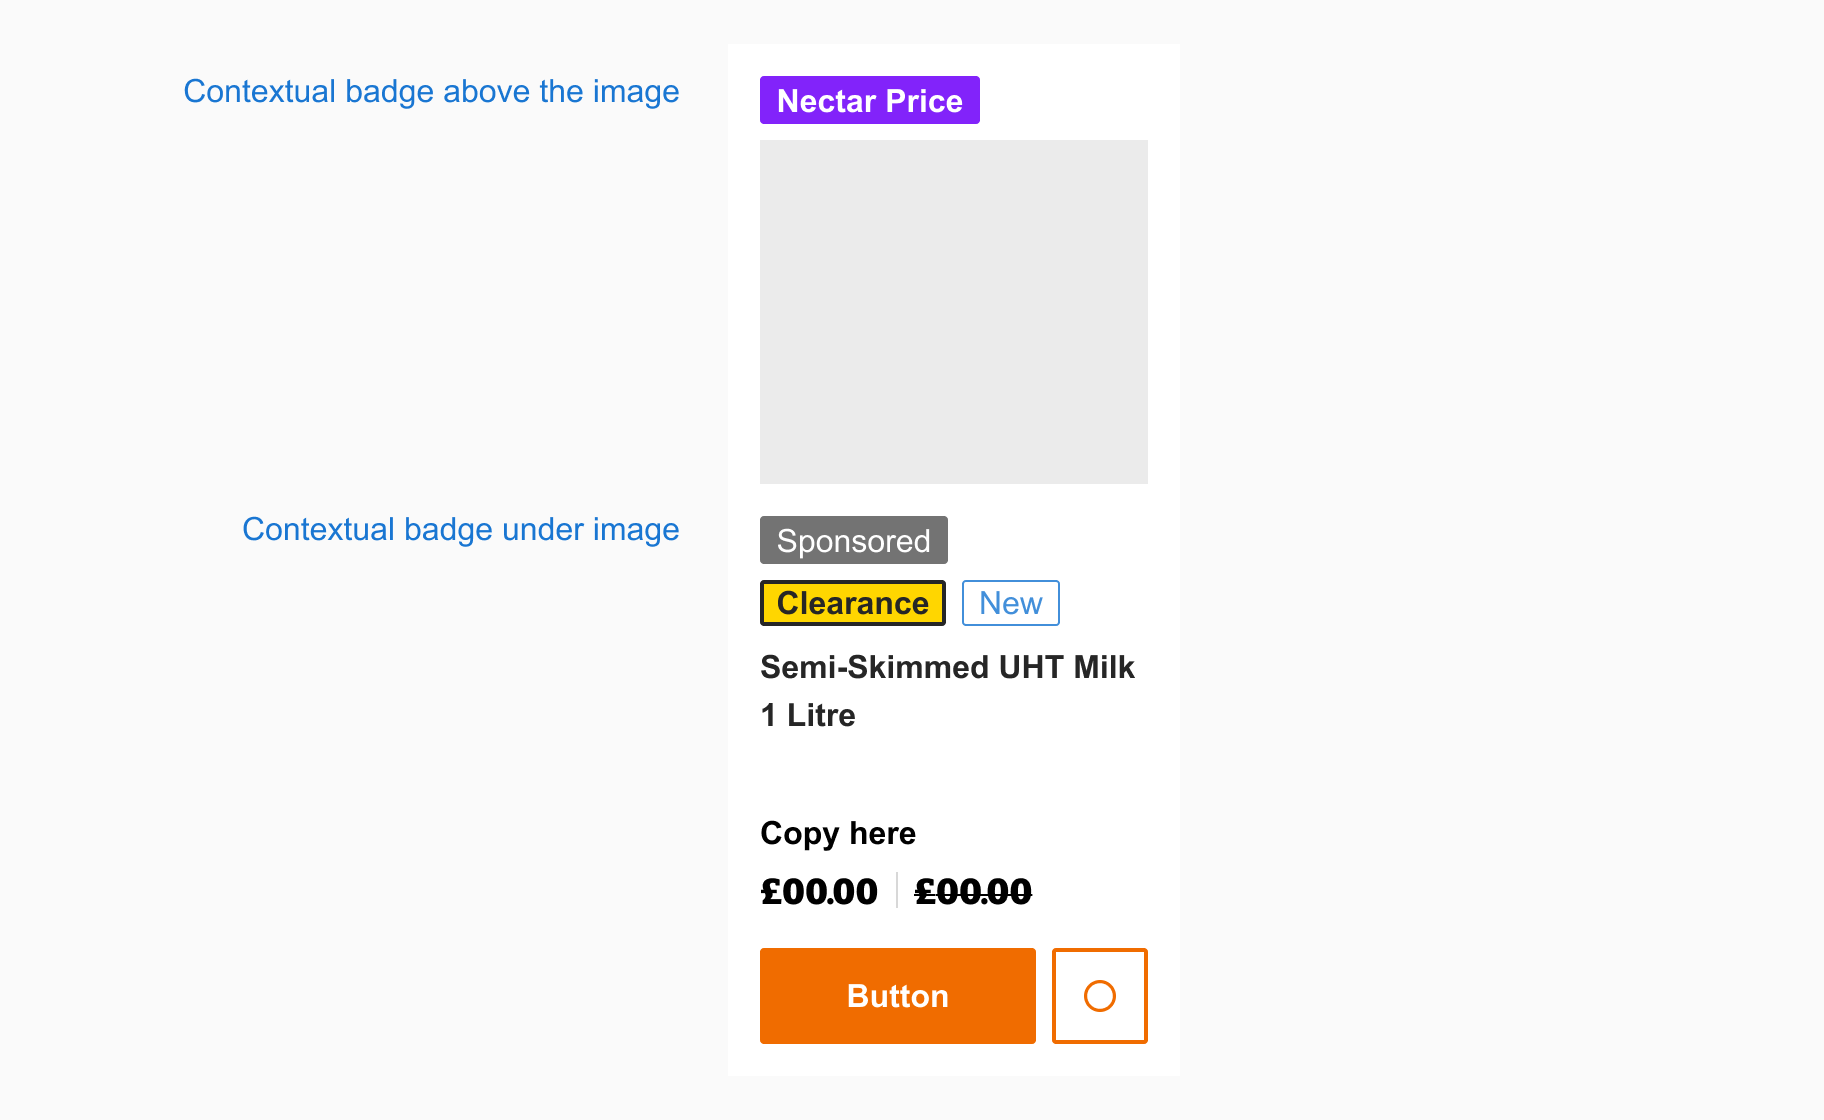 Product card with contextual badge options